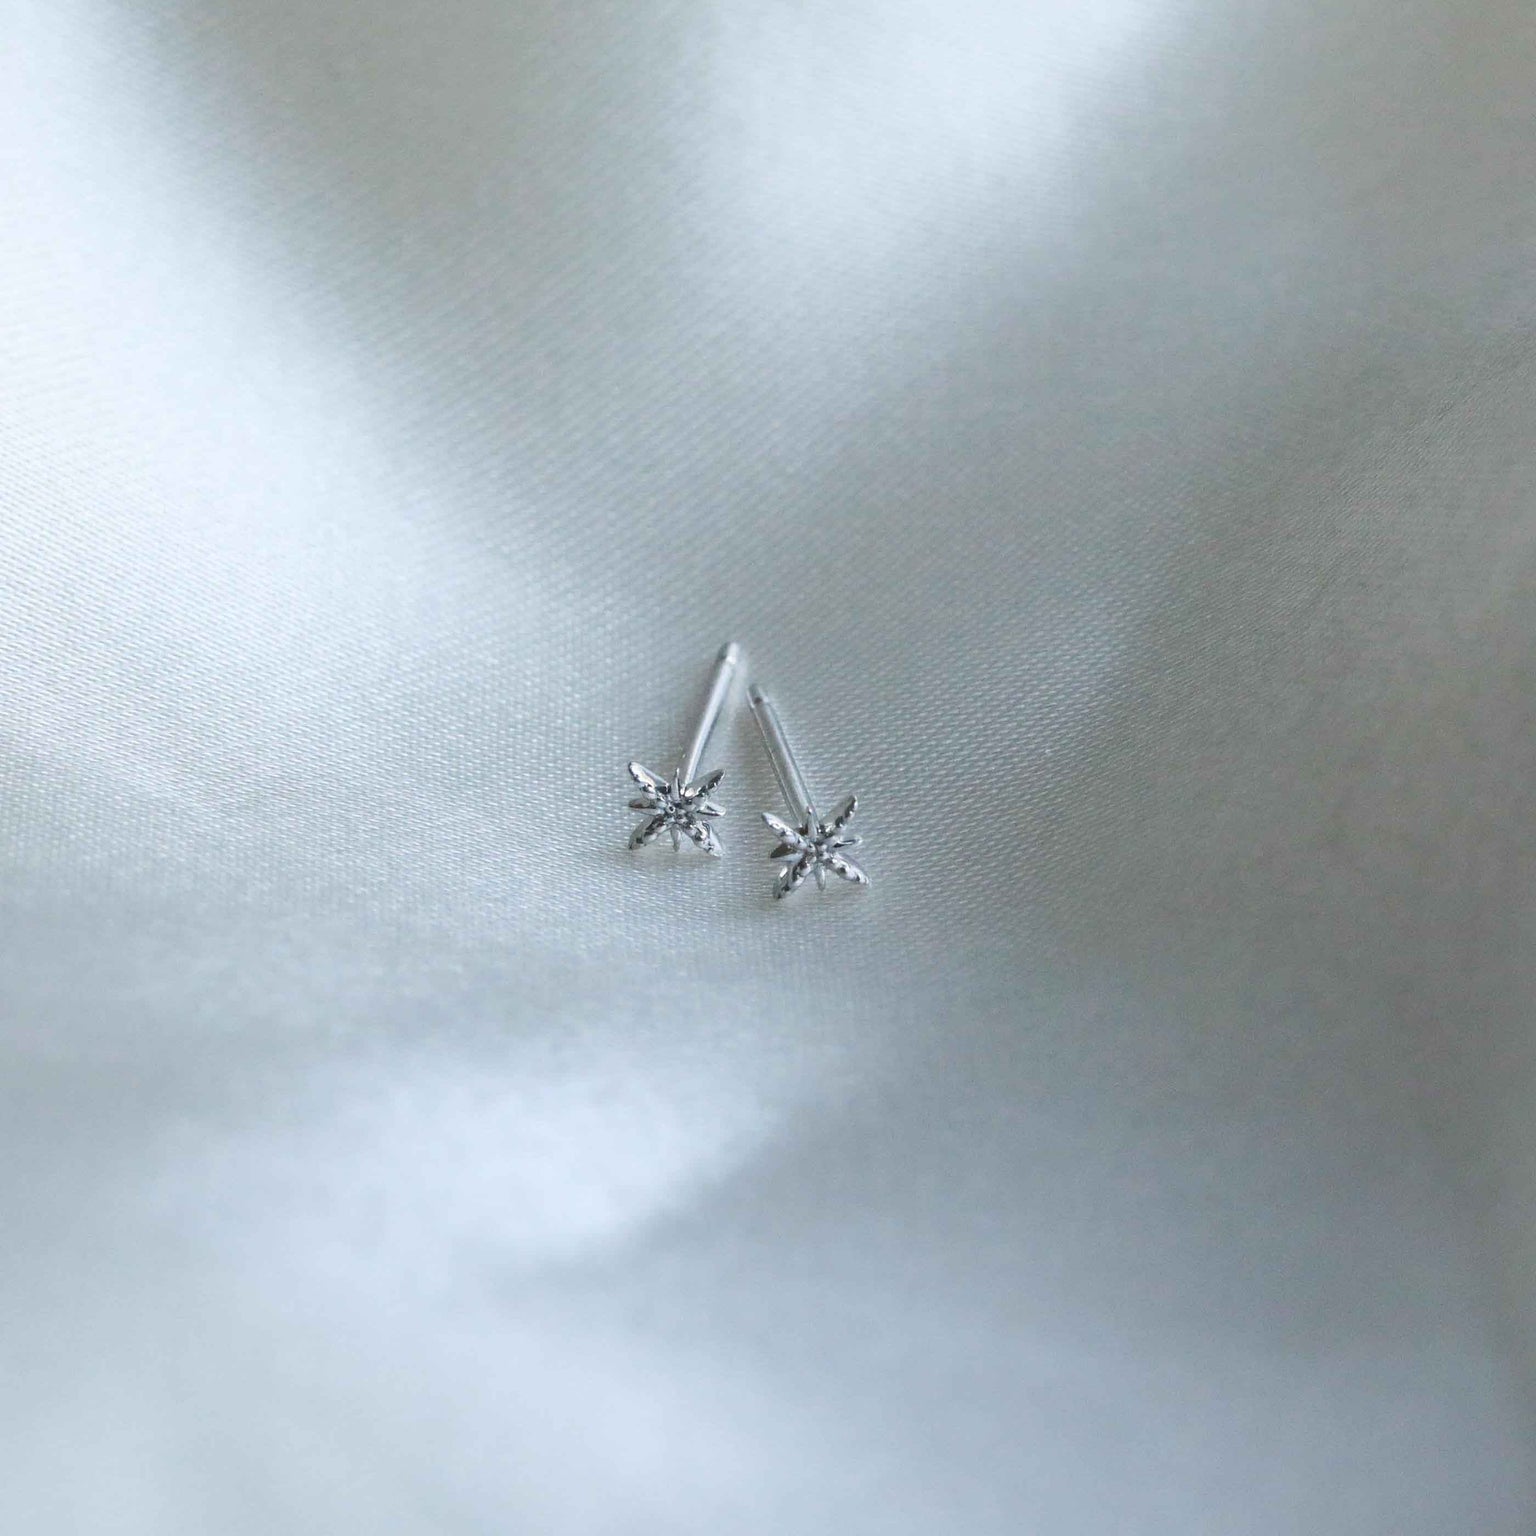 Twilight Stud Earrings in Solid White Gold